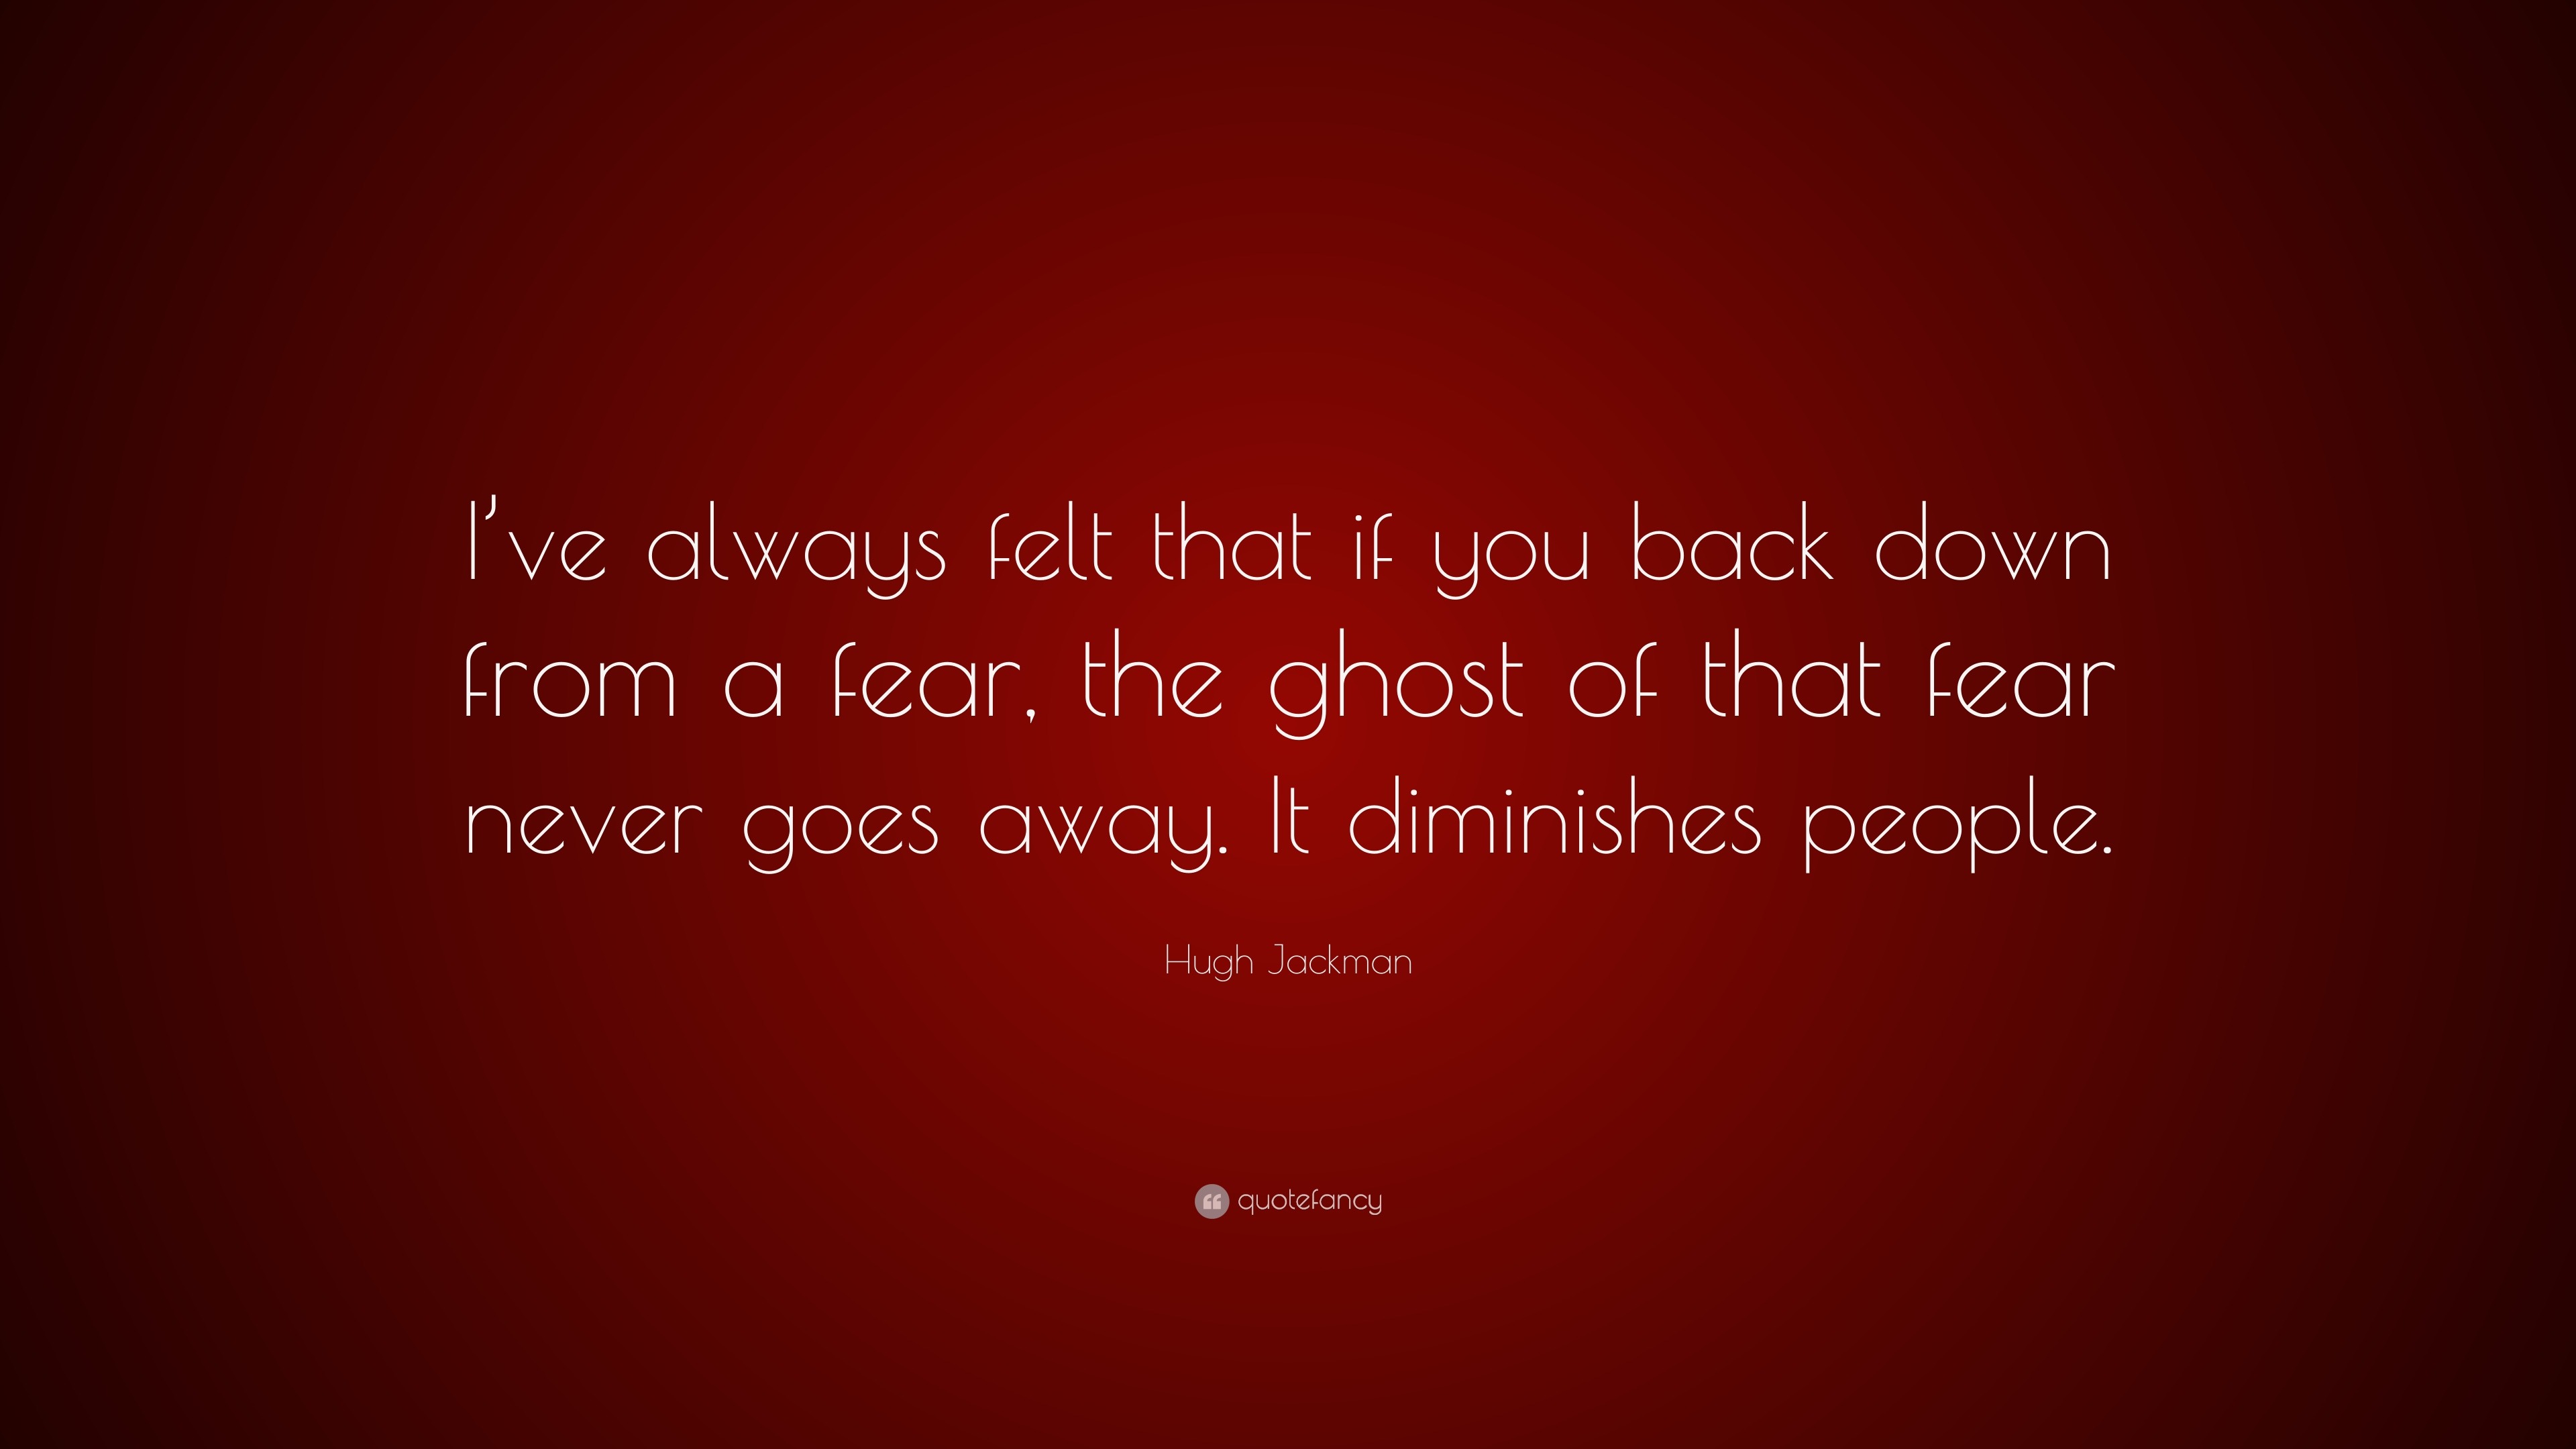 Hugh Jackman Quote: “I’ve always felt that if you back down from a fear ...